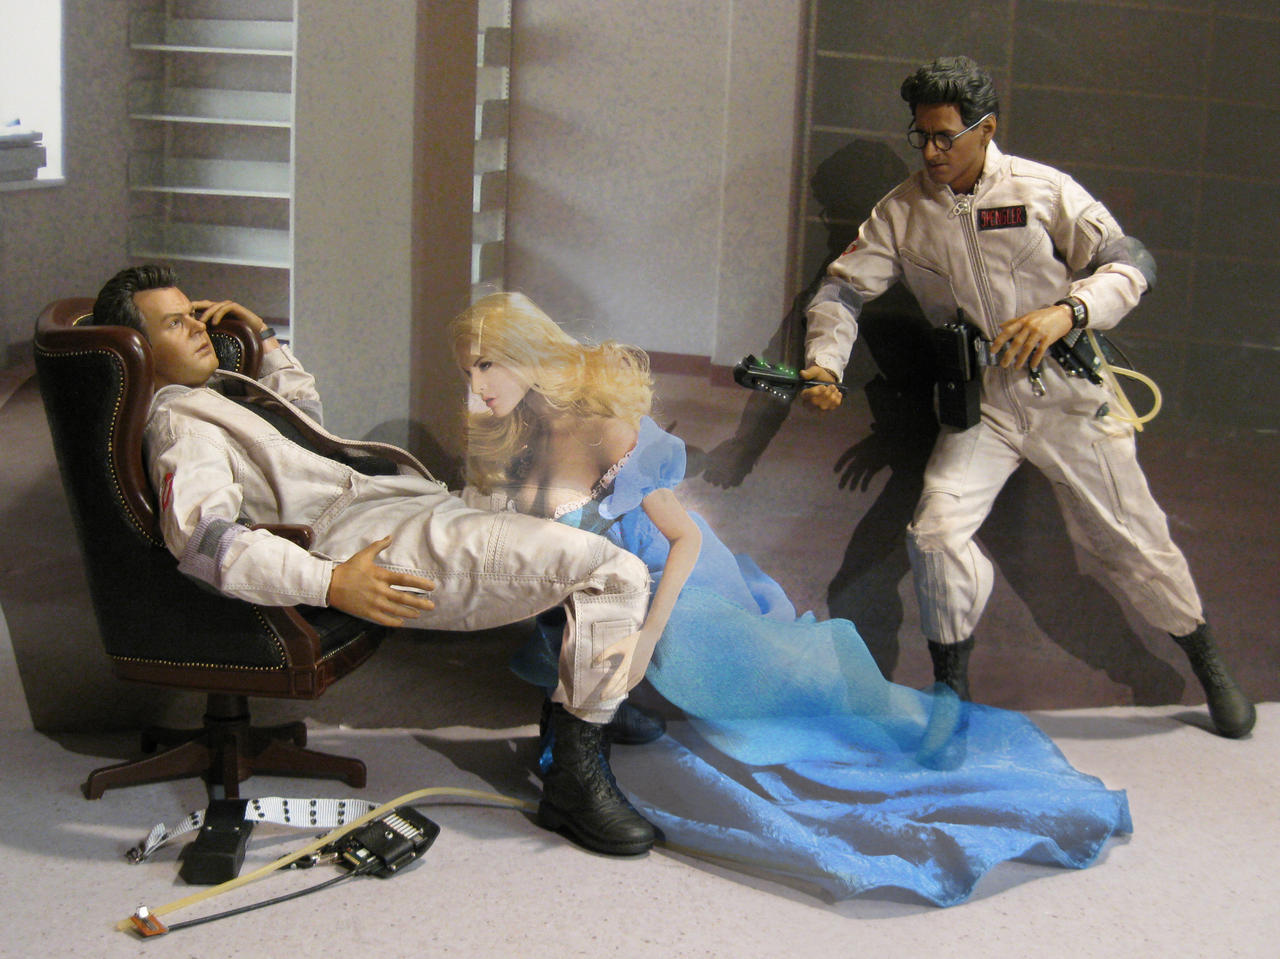 ghostbusters_no_i_will_not_get_you_a_sample_by_thedollknight-dbwfduv.jpg